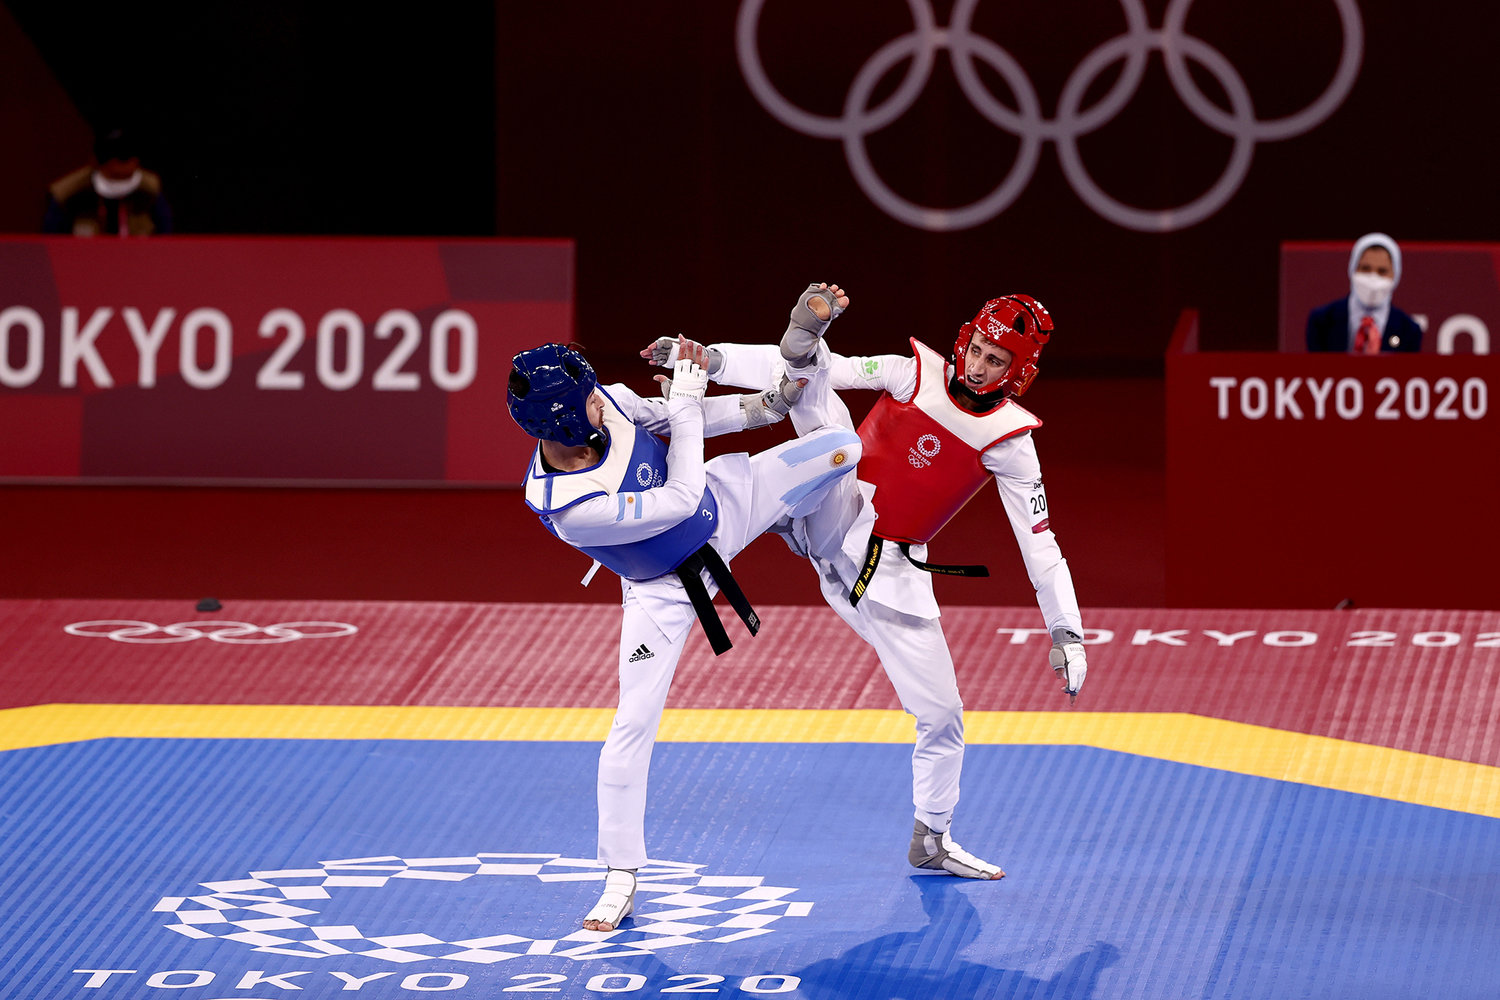 Lucas Lautaro Guzman (L) of Team Argentina competes against Jack Woolley of Team Ireland during the Men's -58kg Taekwondo Round of 16 contest on day one of the Tokyo 2020 Olympic Games at Makuhari Messe Hall on July 24, 2021 in Chiba, Japan.